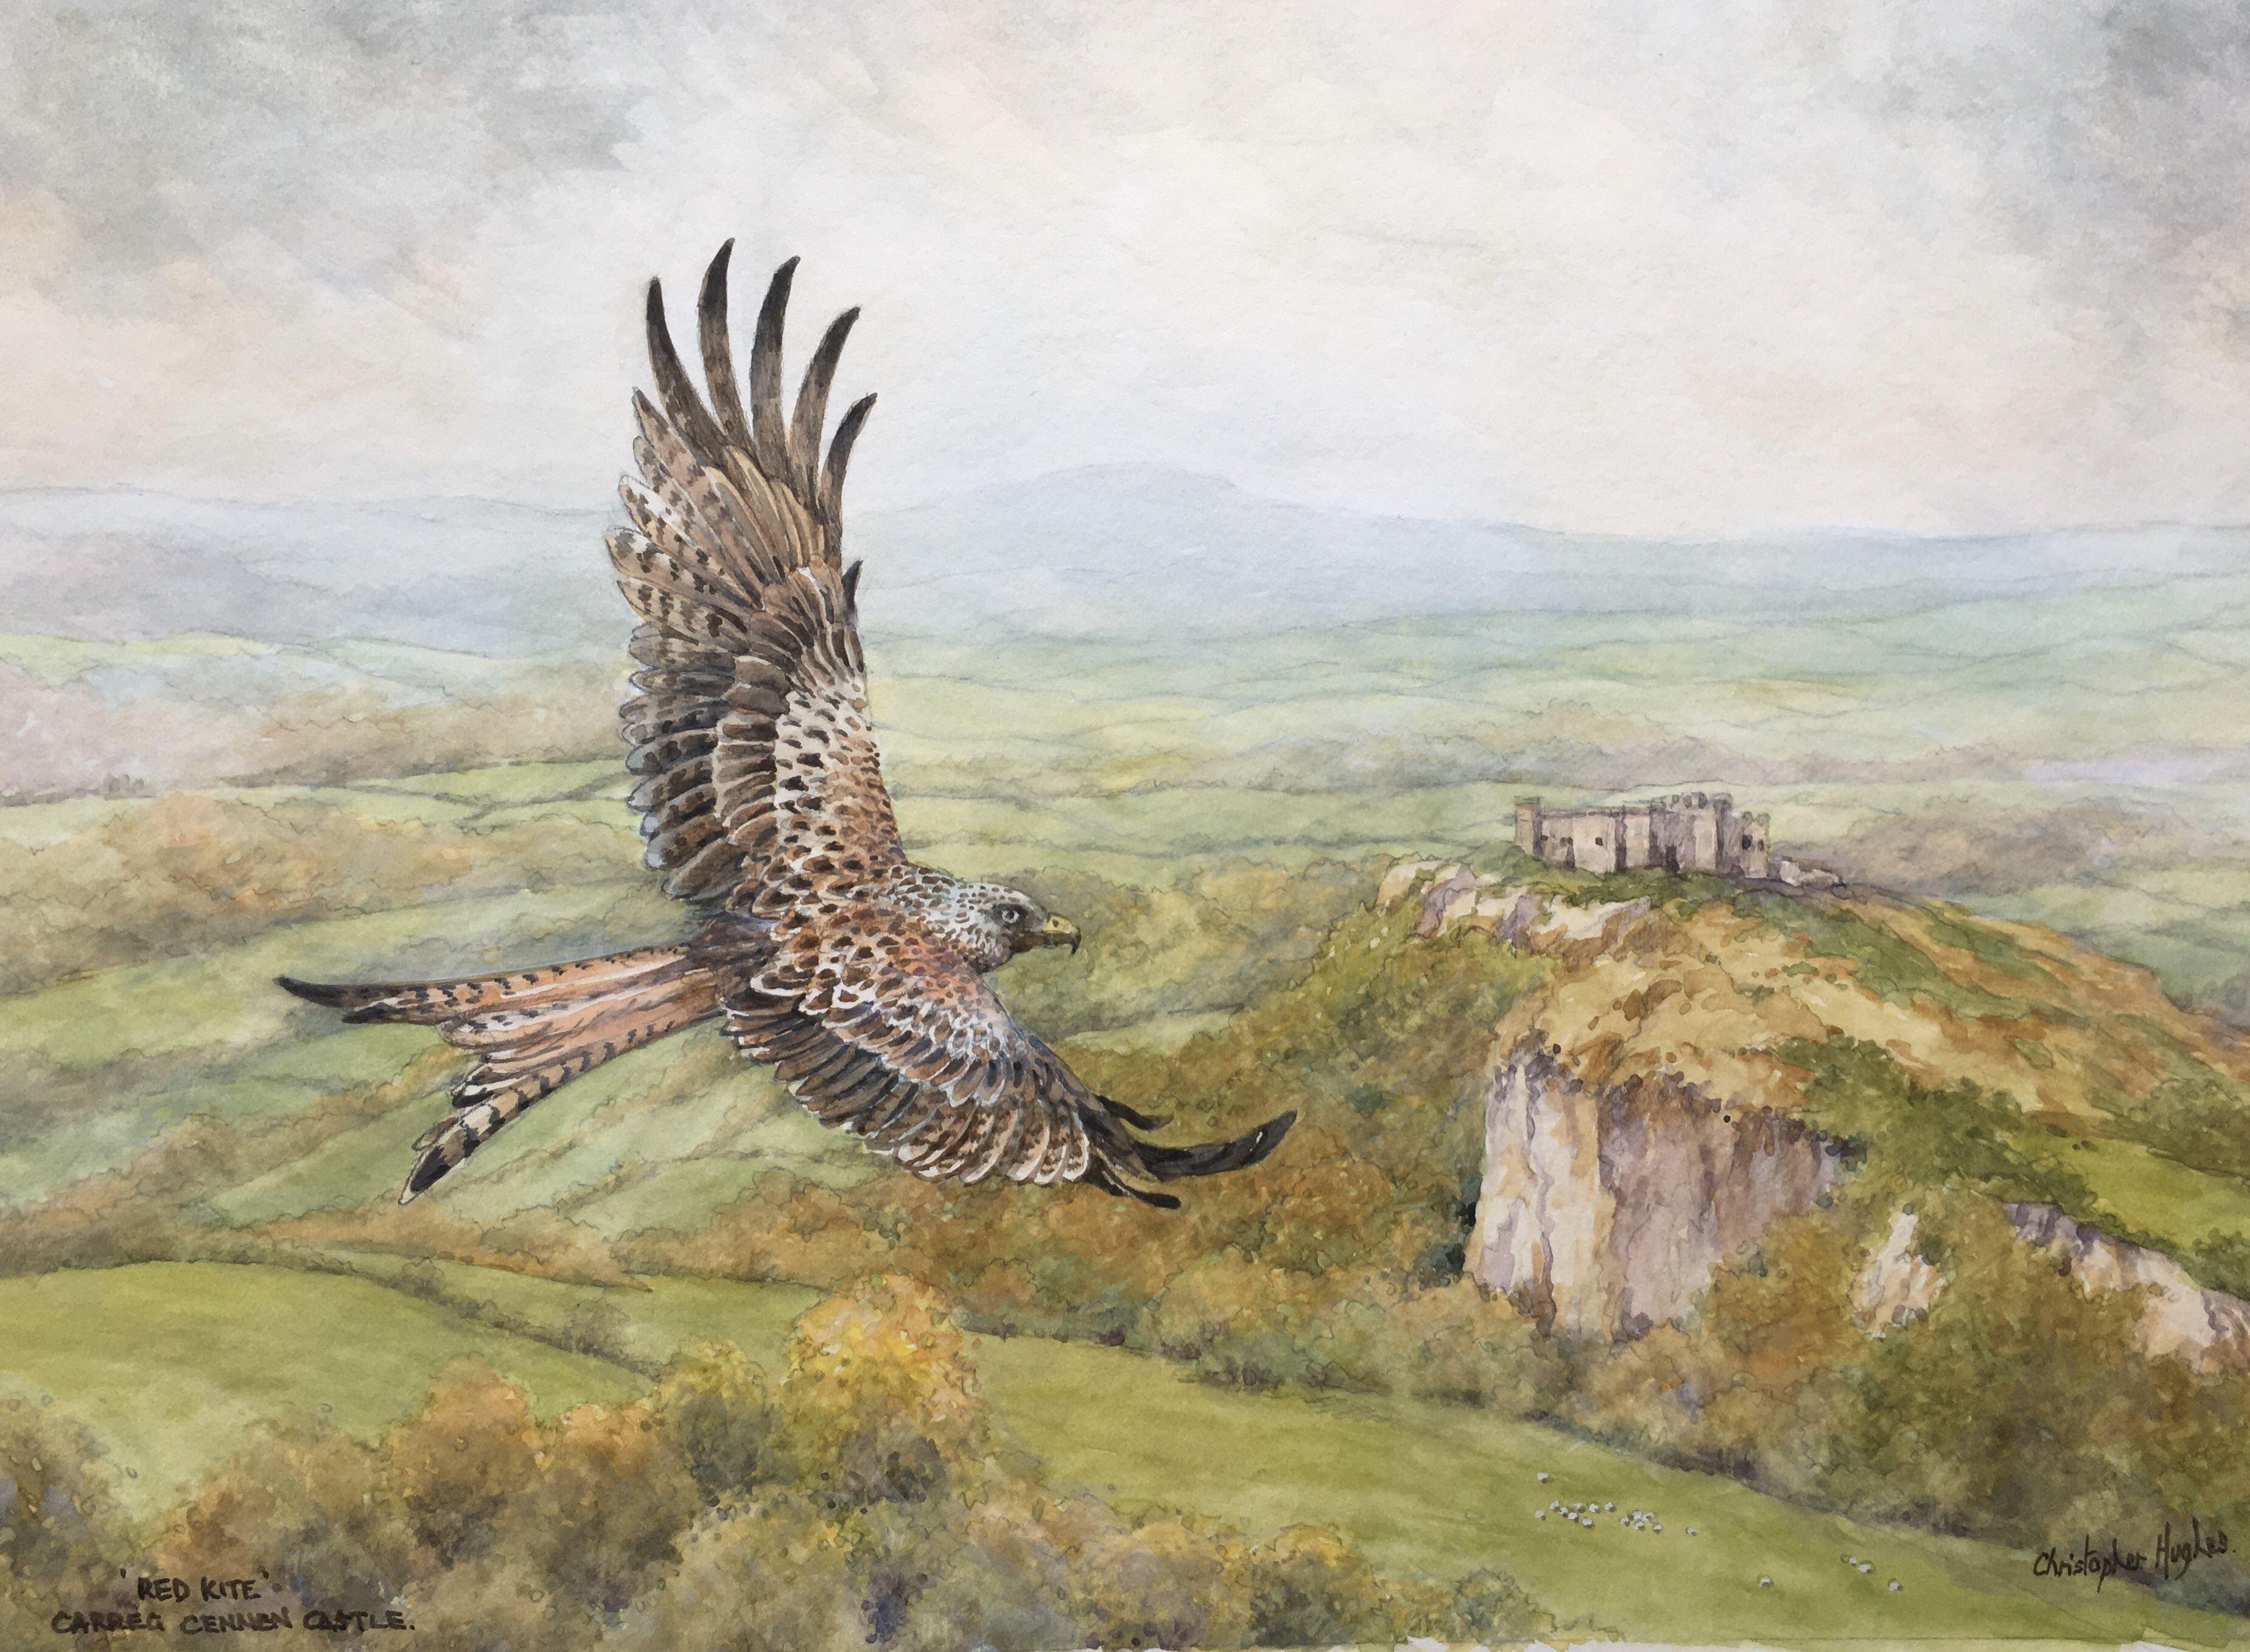 Red Kite . Carreg Cennen .Wales, Painting, Watercolor on Watercolor Paper - Art by Christopher Hughes